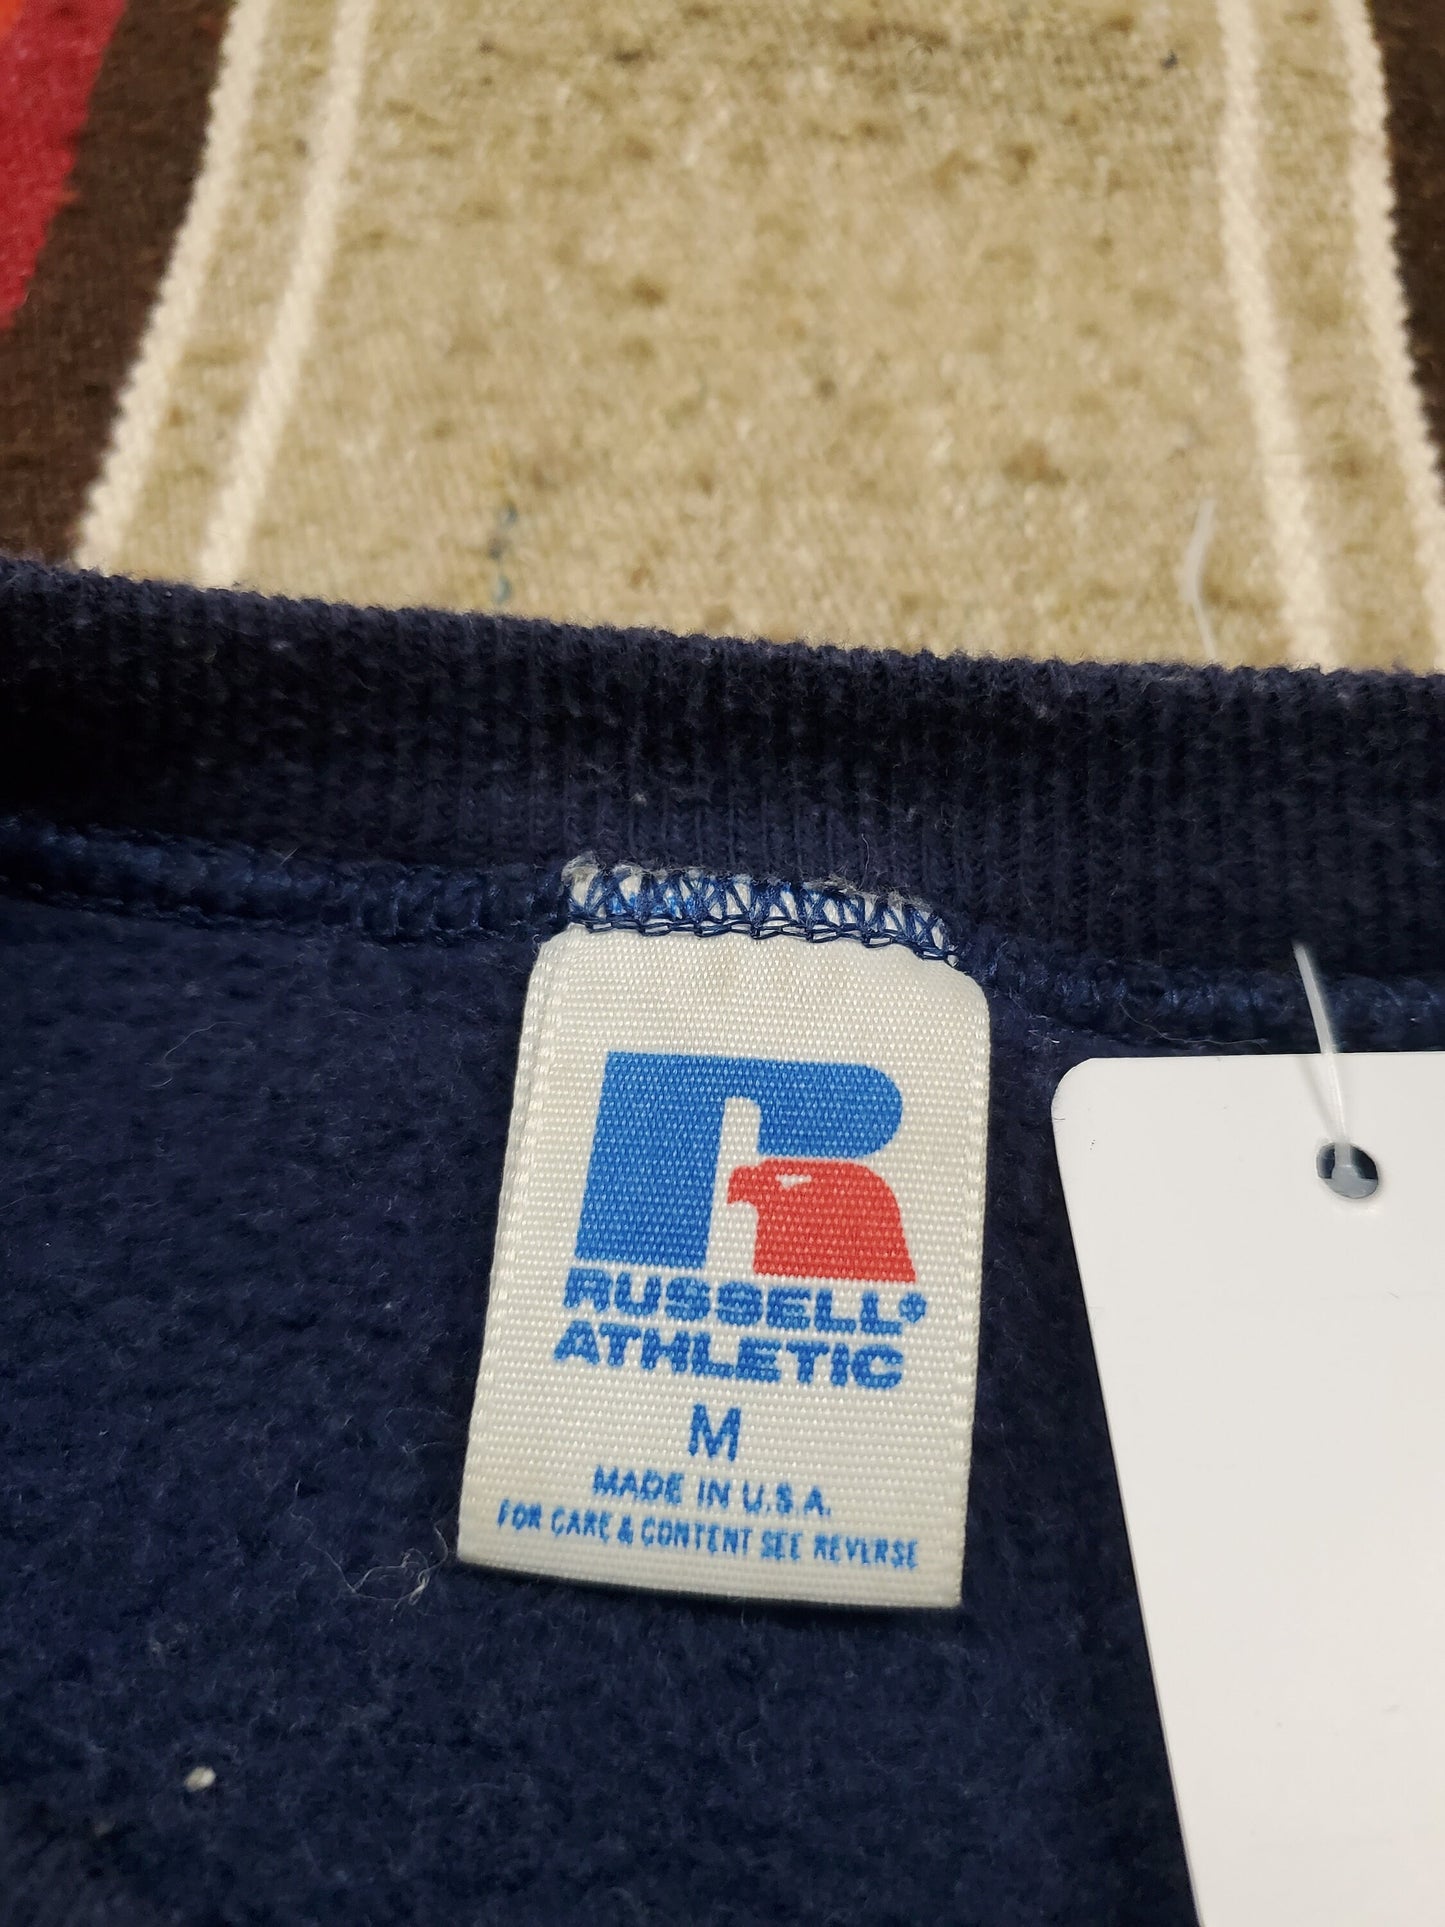 1980s Russell Athletic 82nd Airbrone All American Cold Steel Sweatshirt Made in USA Size M